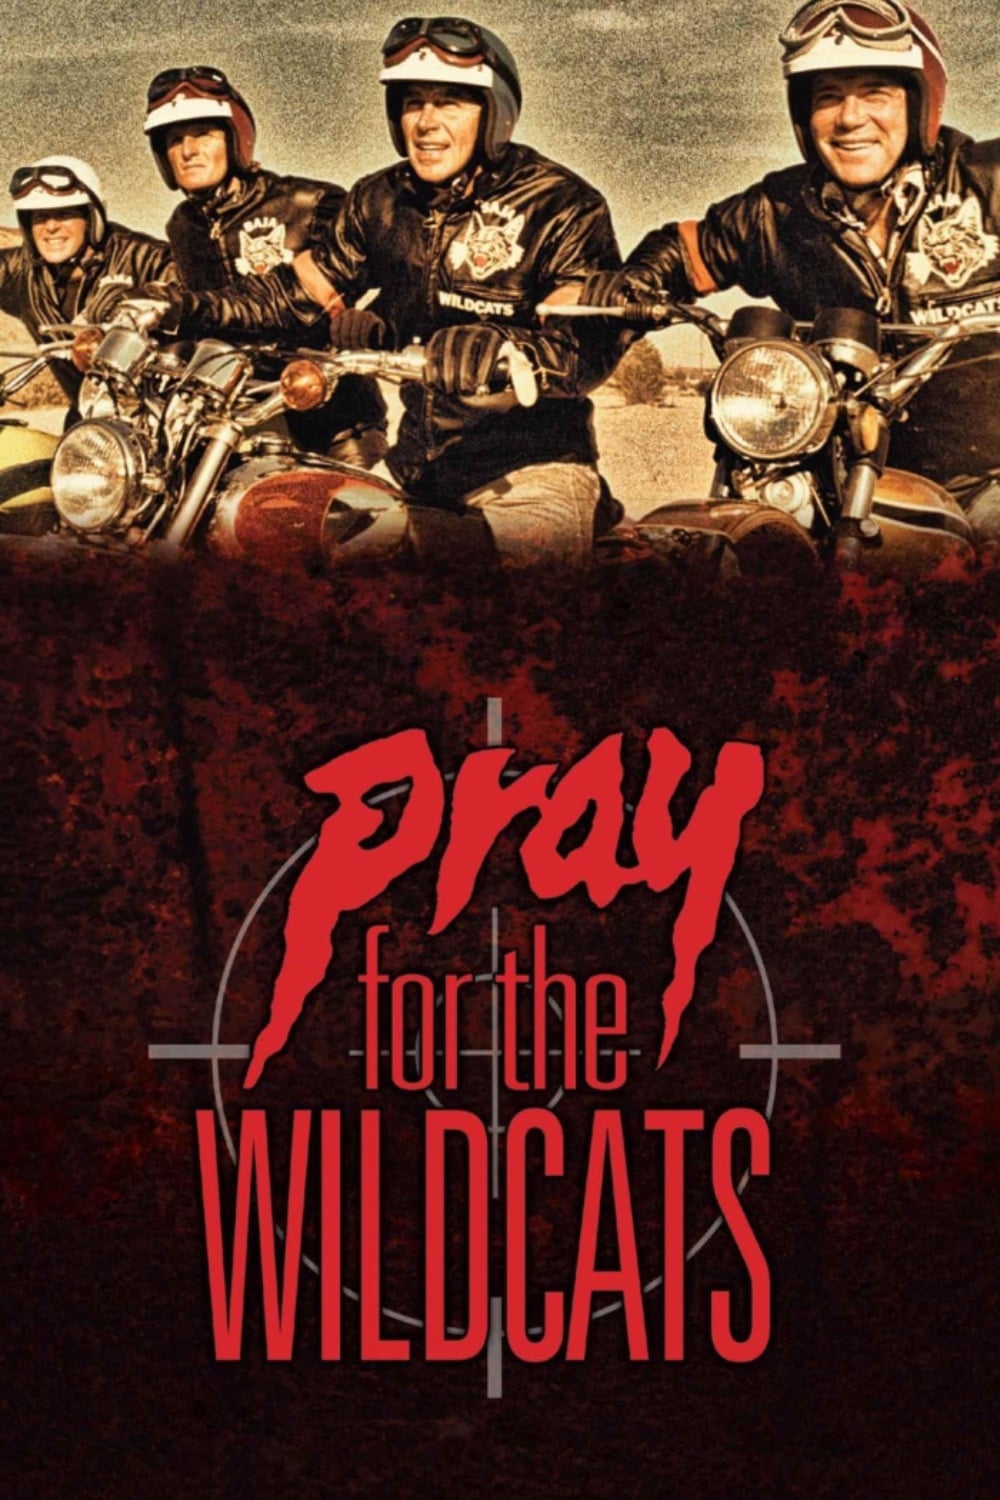 Pray for the Wildcats (1974)